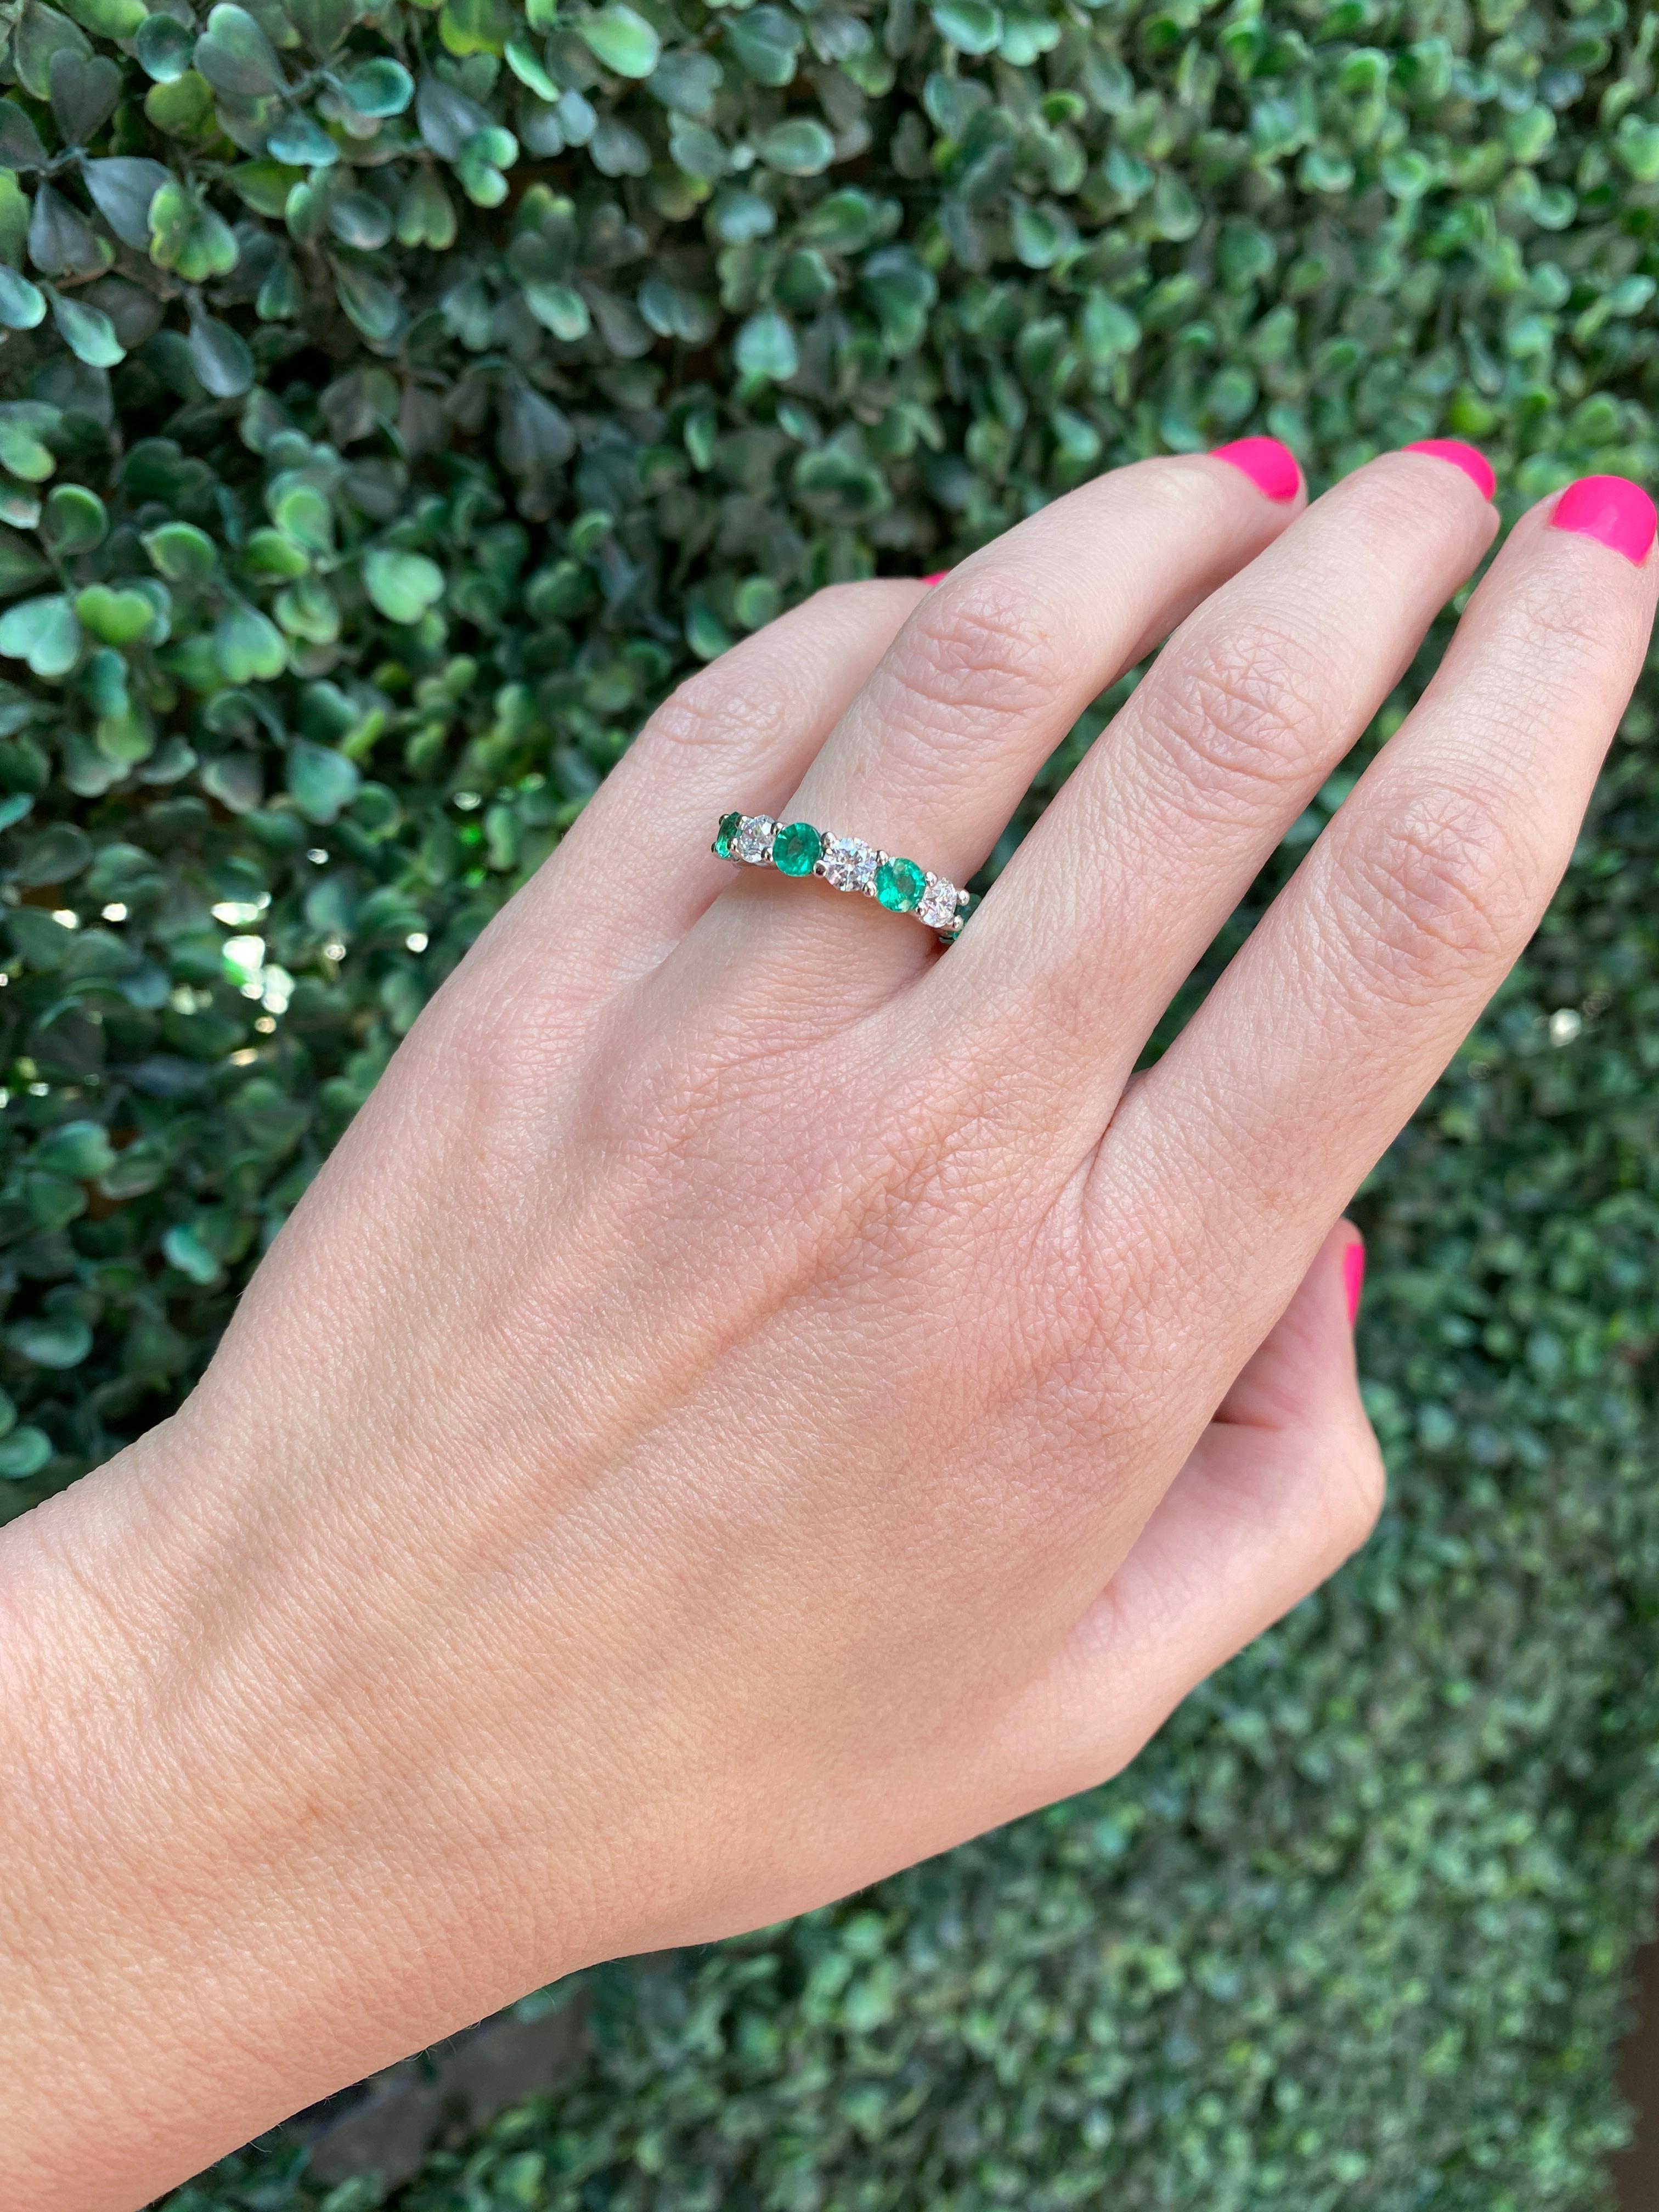 This 14 karat white gold band features 0.92 carat total weight in round emeralds alternating with 0.75 carat total weight in round diamonds set in 14 karat white gold. Wear alone or layer with your other favorite rings for your own unique look. It